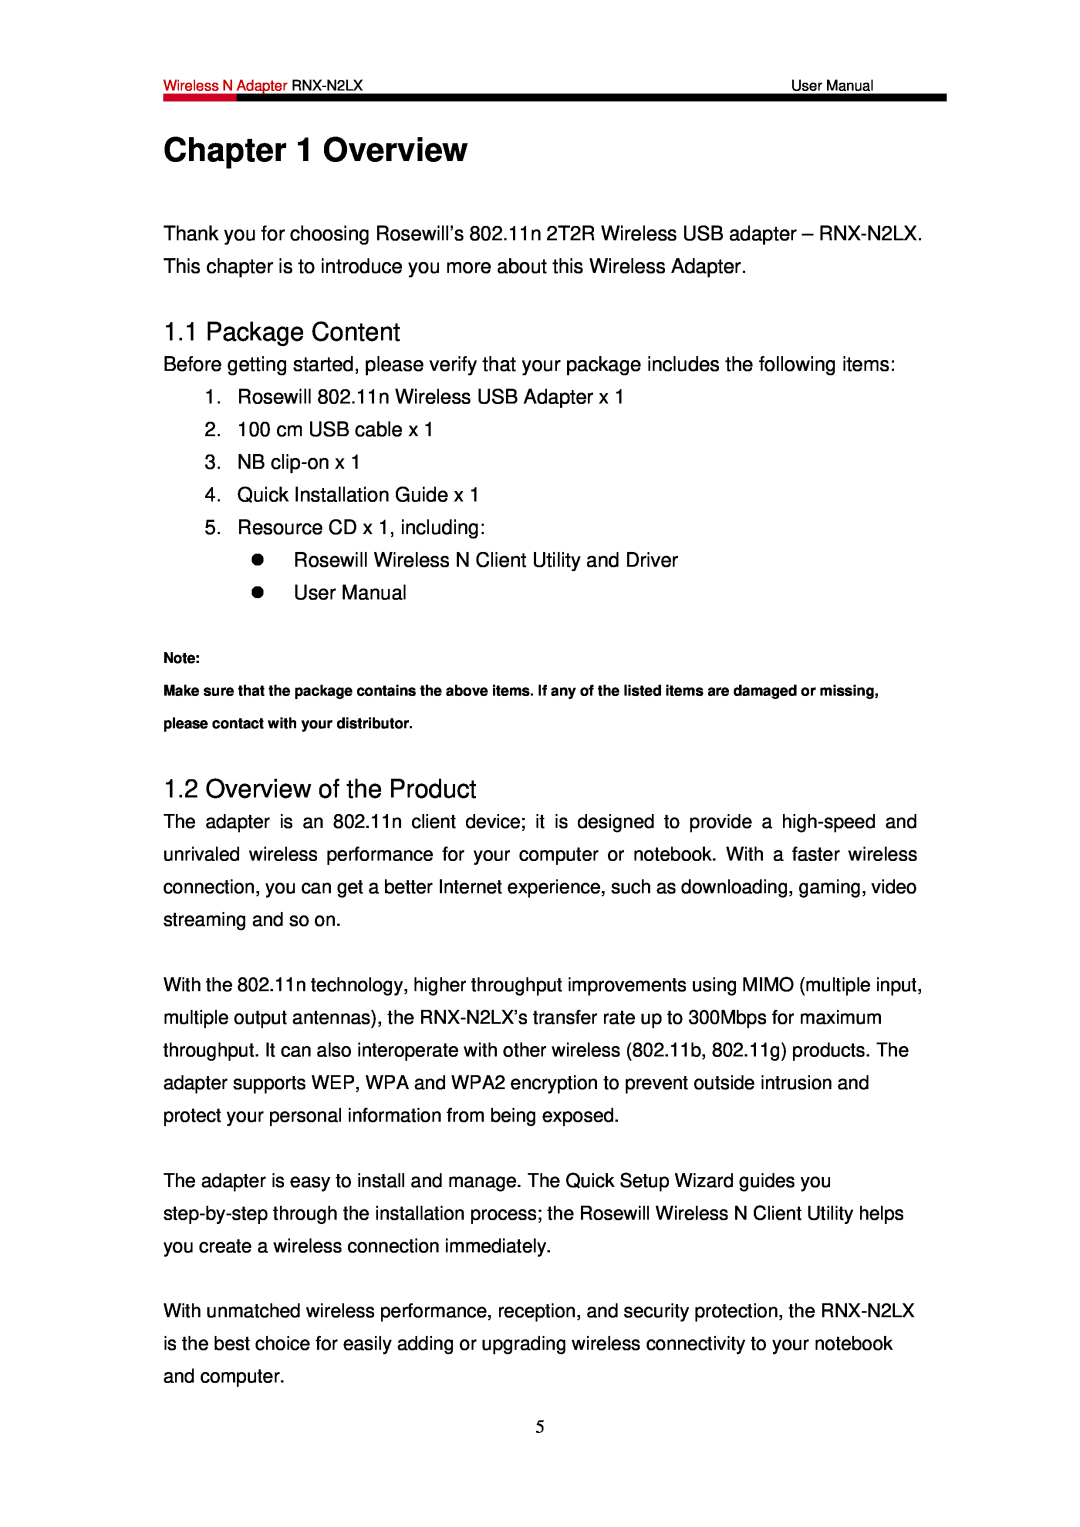 Rosewill RNX-N2LX user manual Package Content, Overview of the Product 